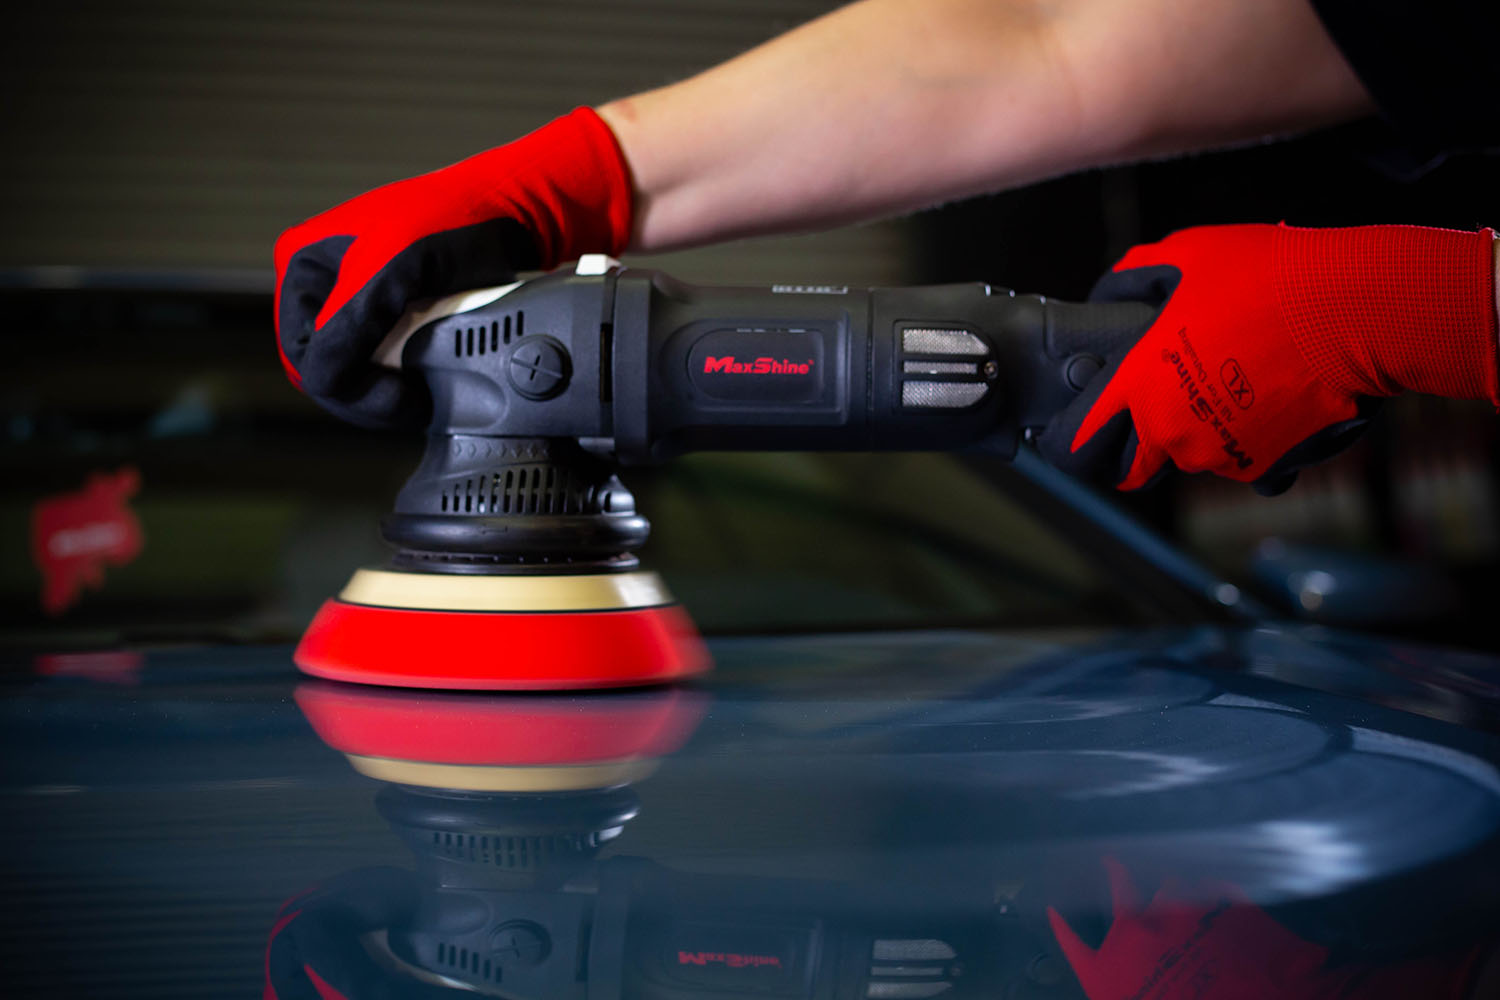  Maxshine M15 Pro Series II Dual Action Polisher with Powerful  1000W Motor for Car Detailing, Variable 6 Speed Dial : Automotive